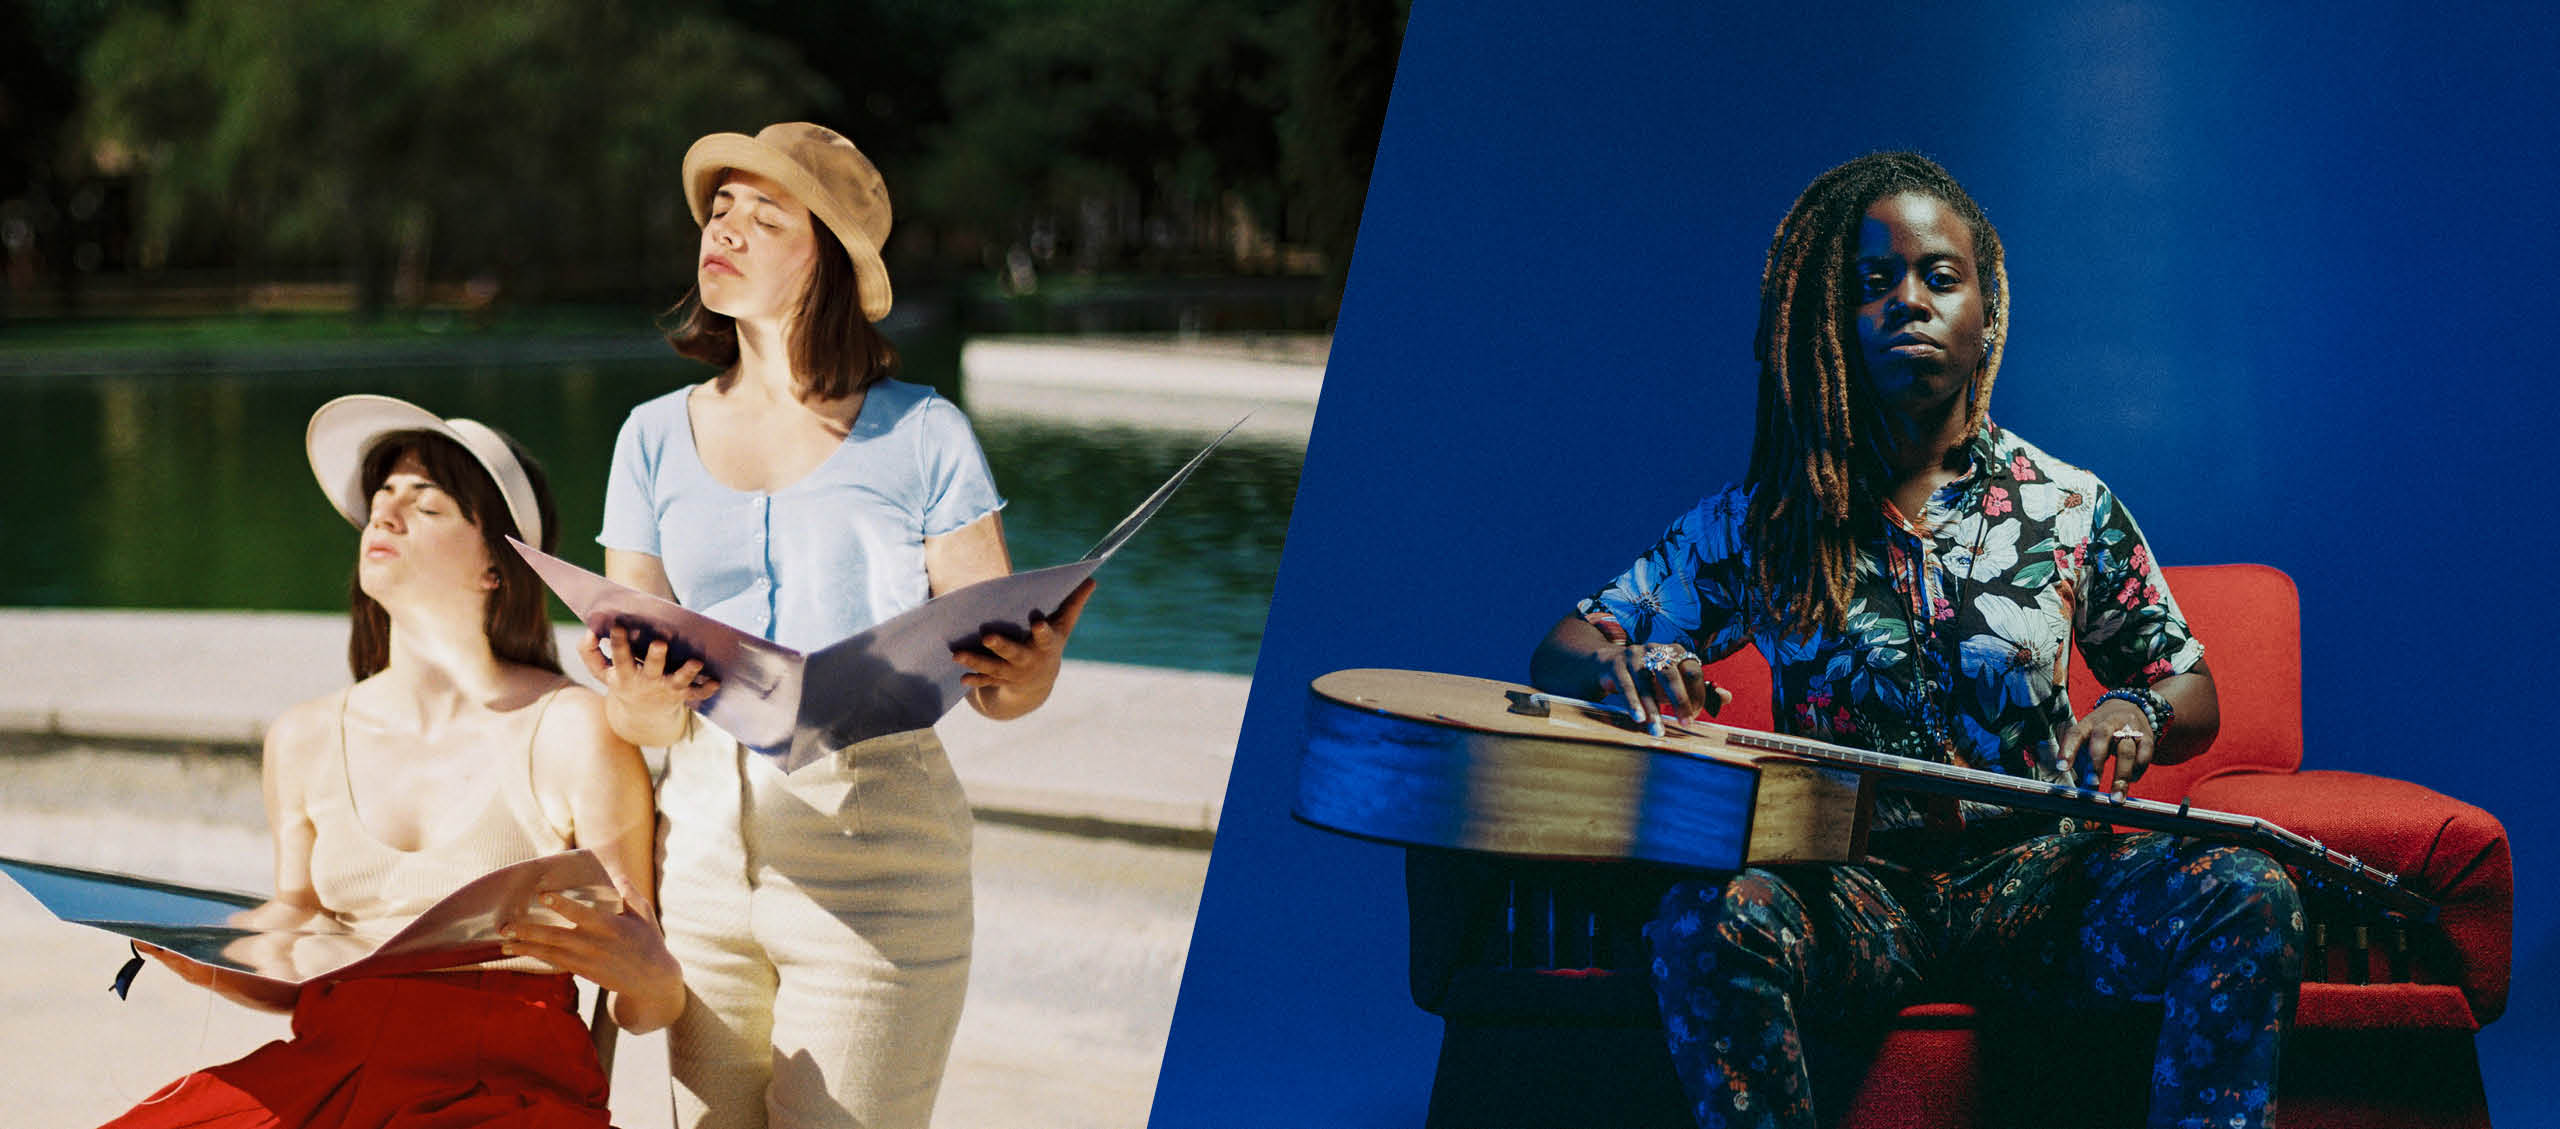 On the left, two women tan themselves with foil reflectors outside on a sunny day. On the right, a musician sits with an acoustic guitar on her lap.